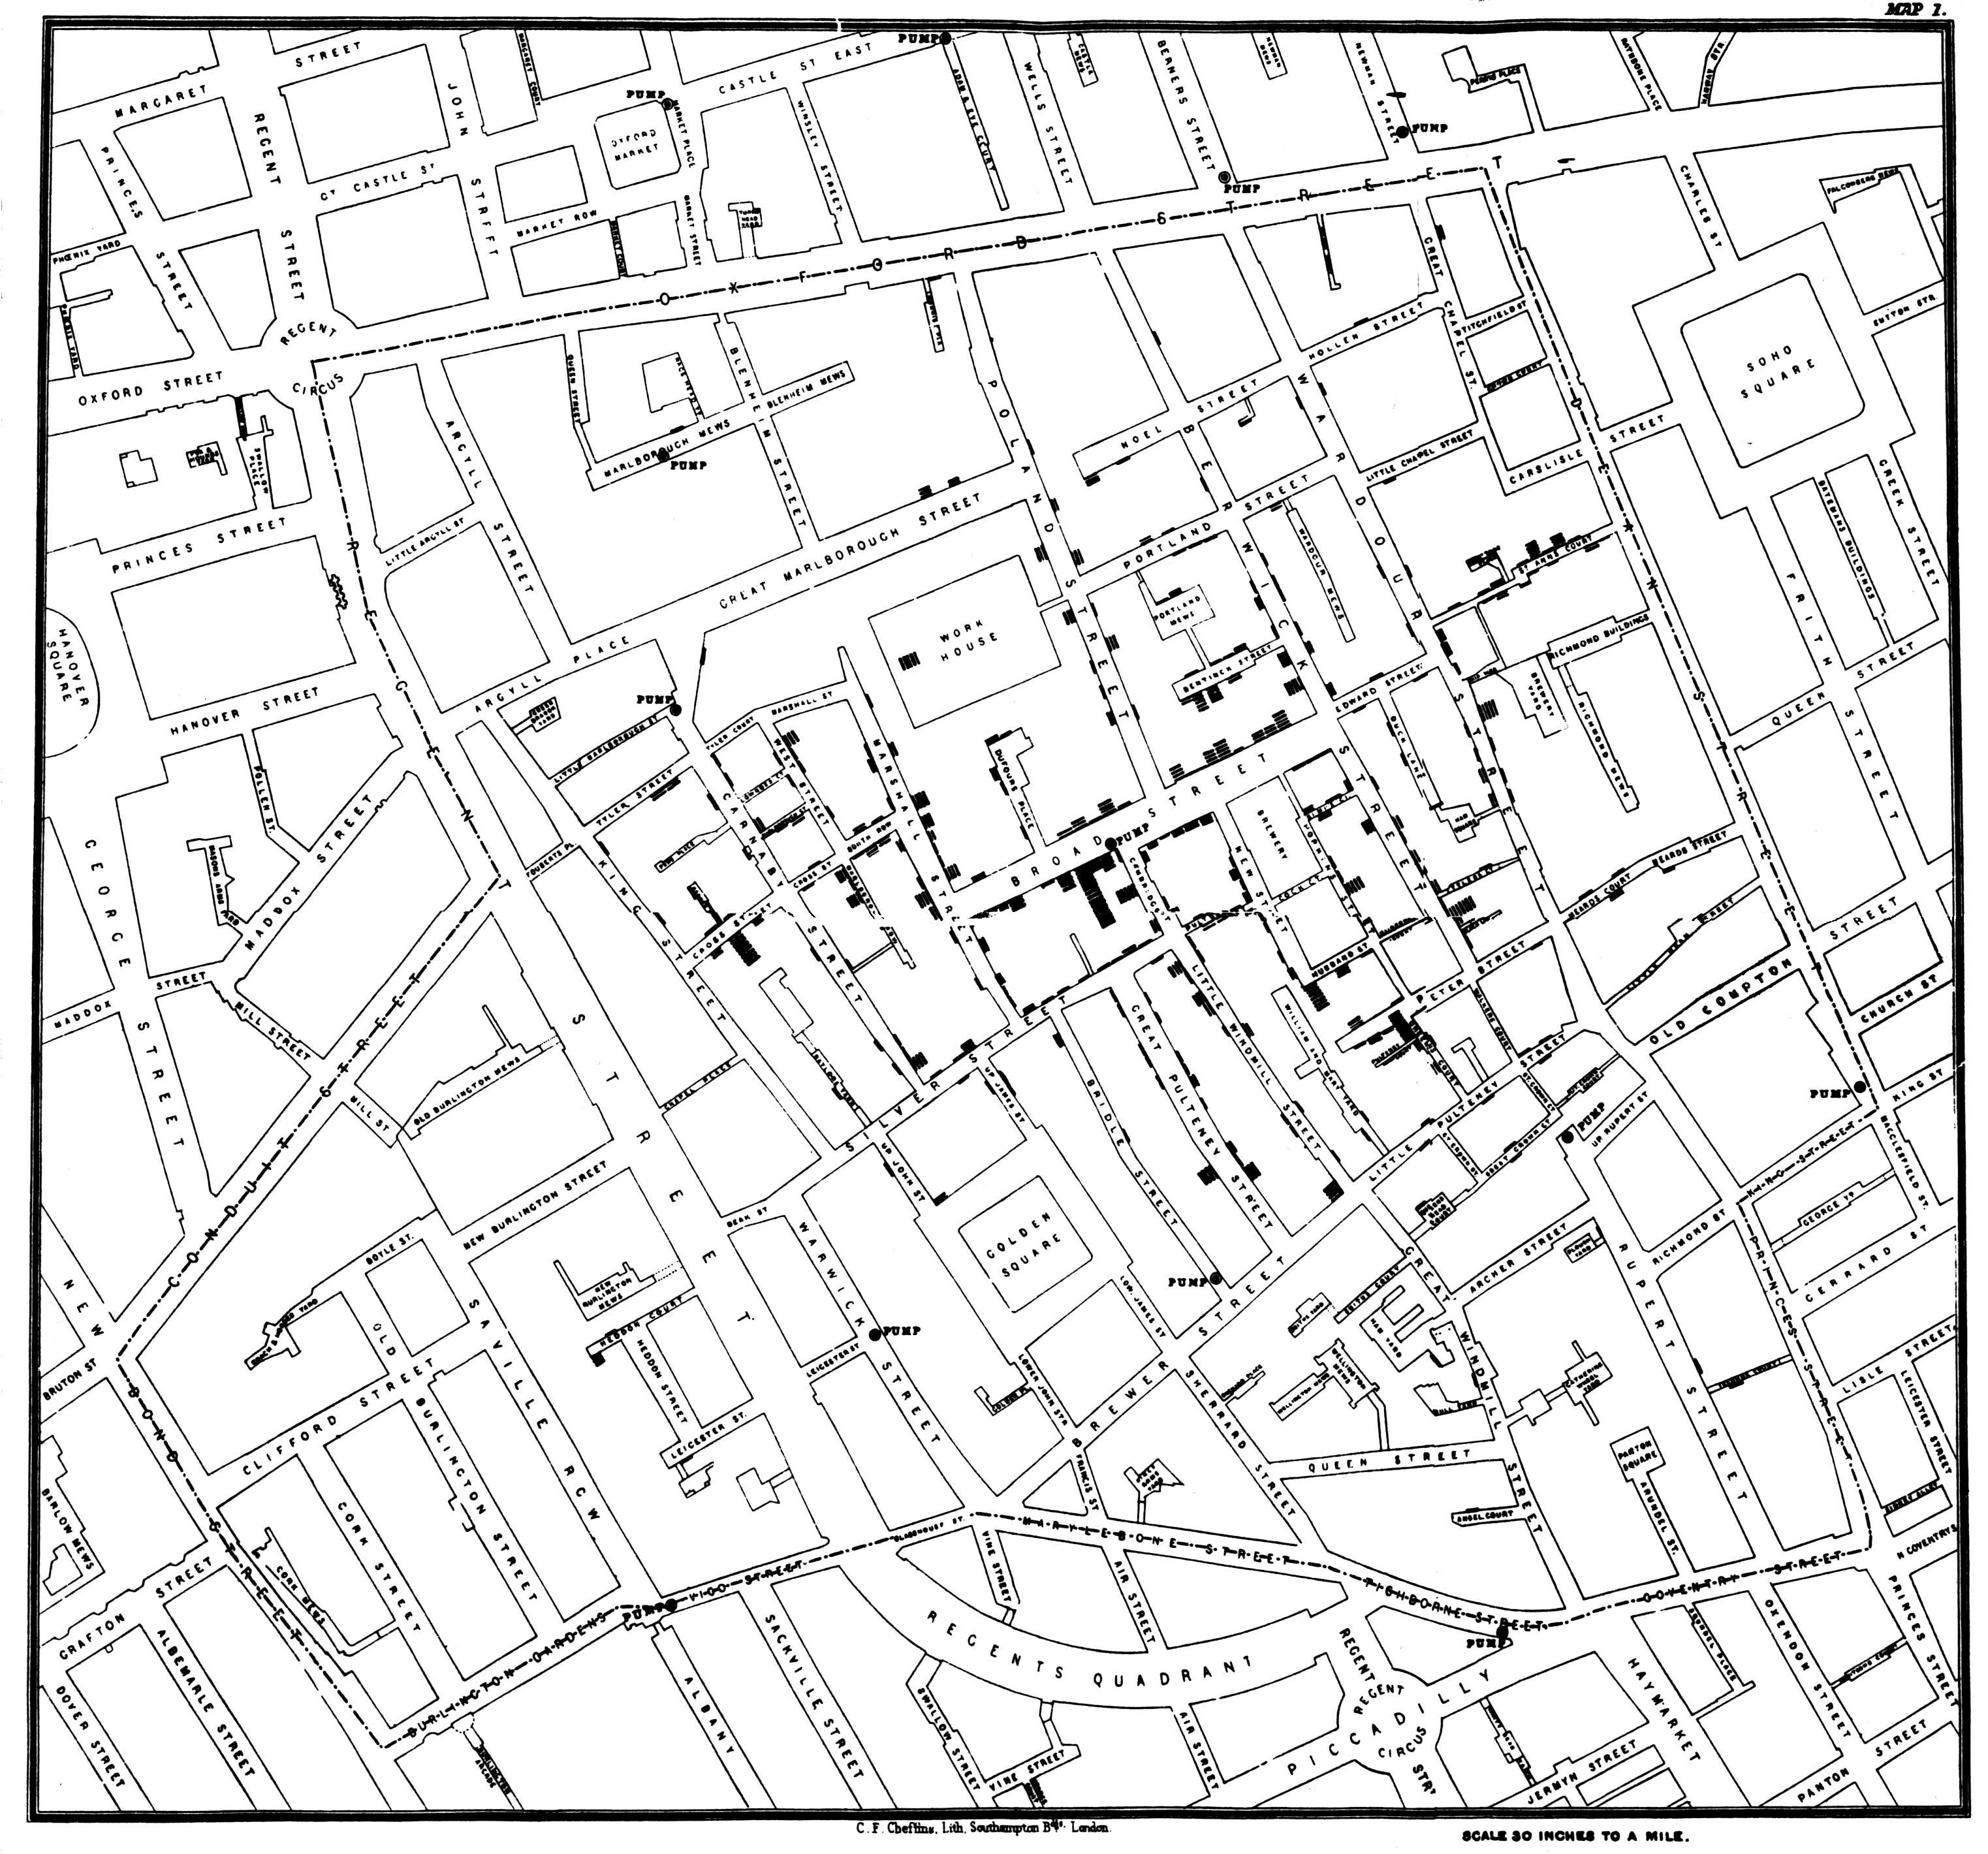 John Snow's map of Cholera deaths in central London. Each line represents a death.Each circle represents a water pump. Source: Wikipedia.